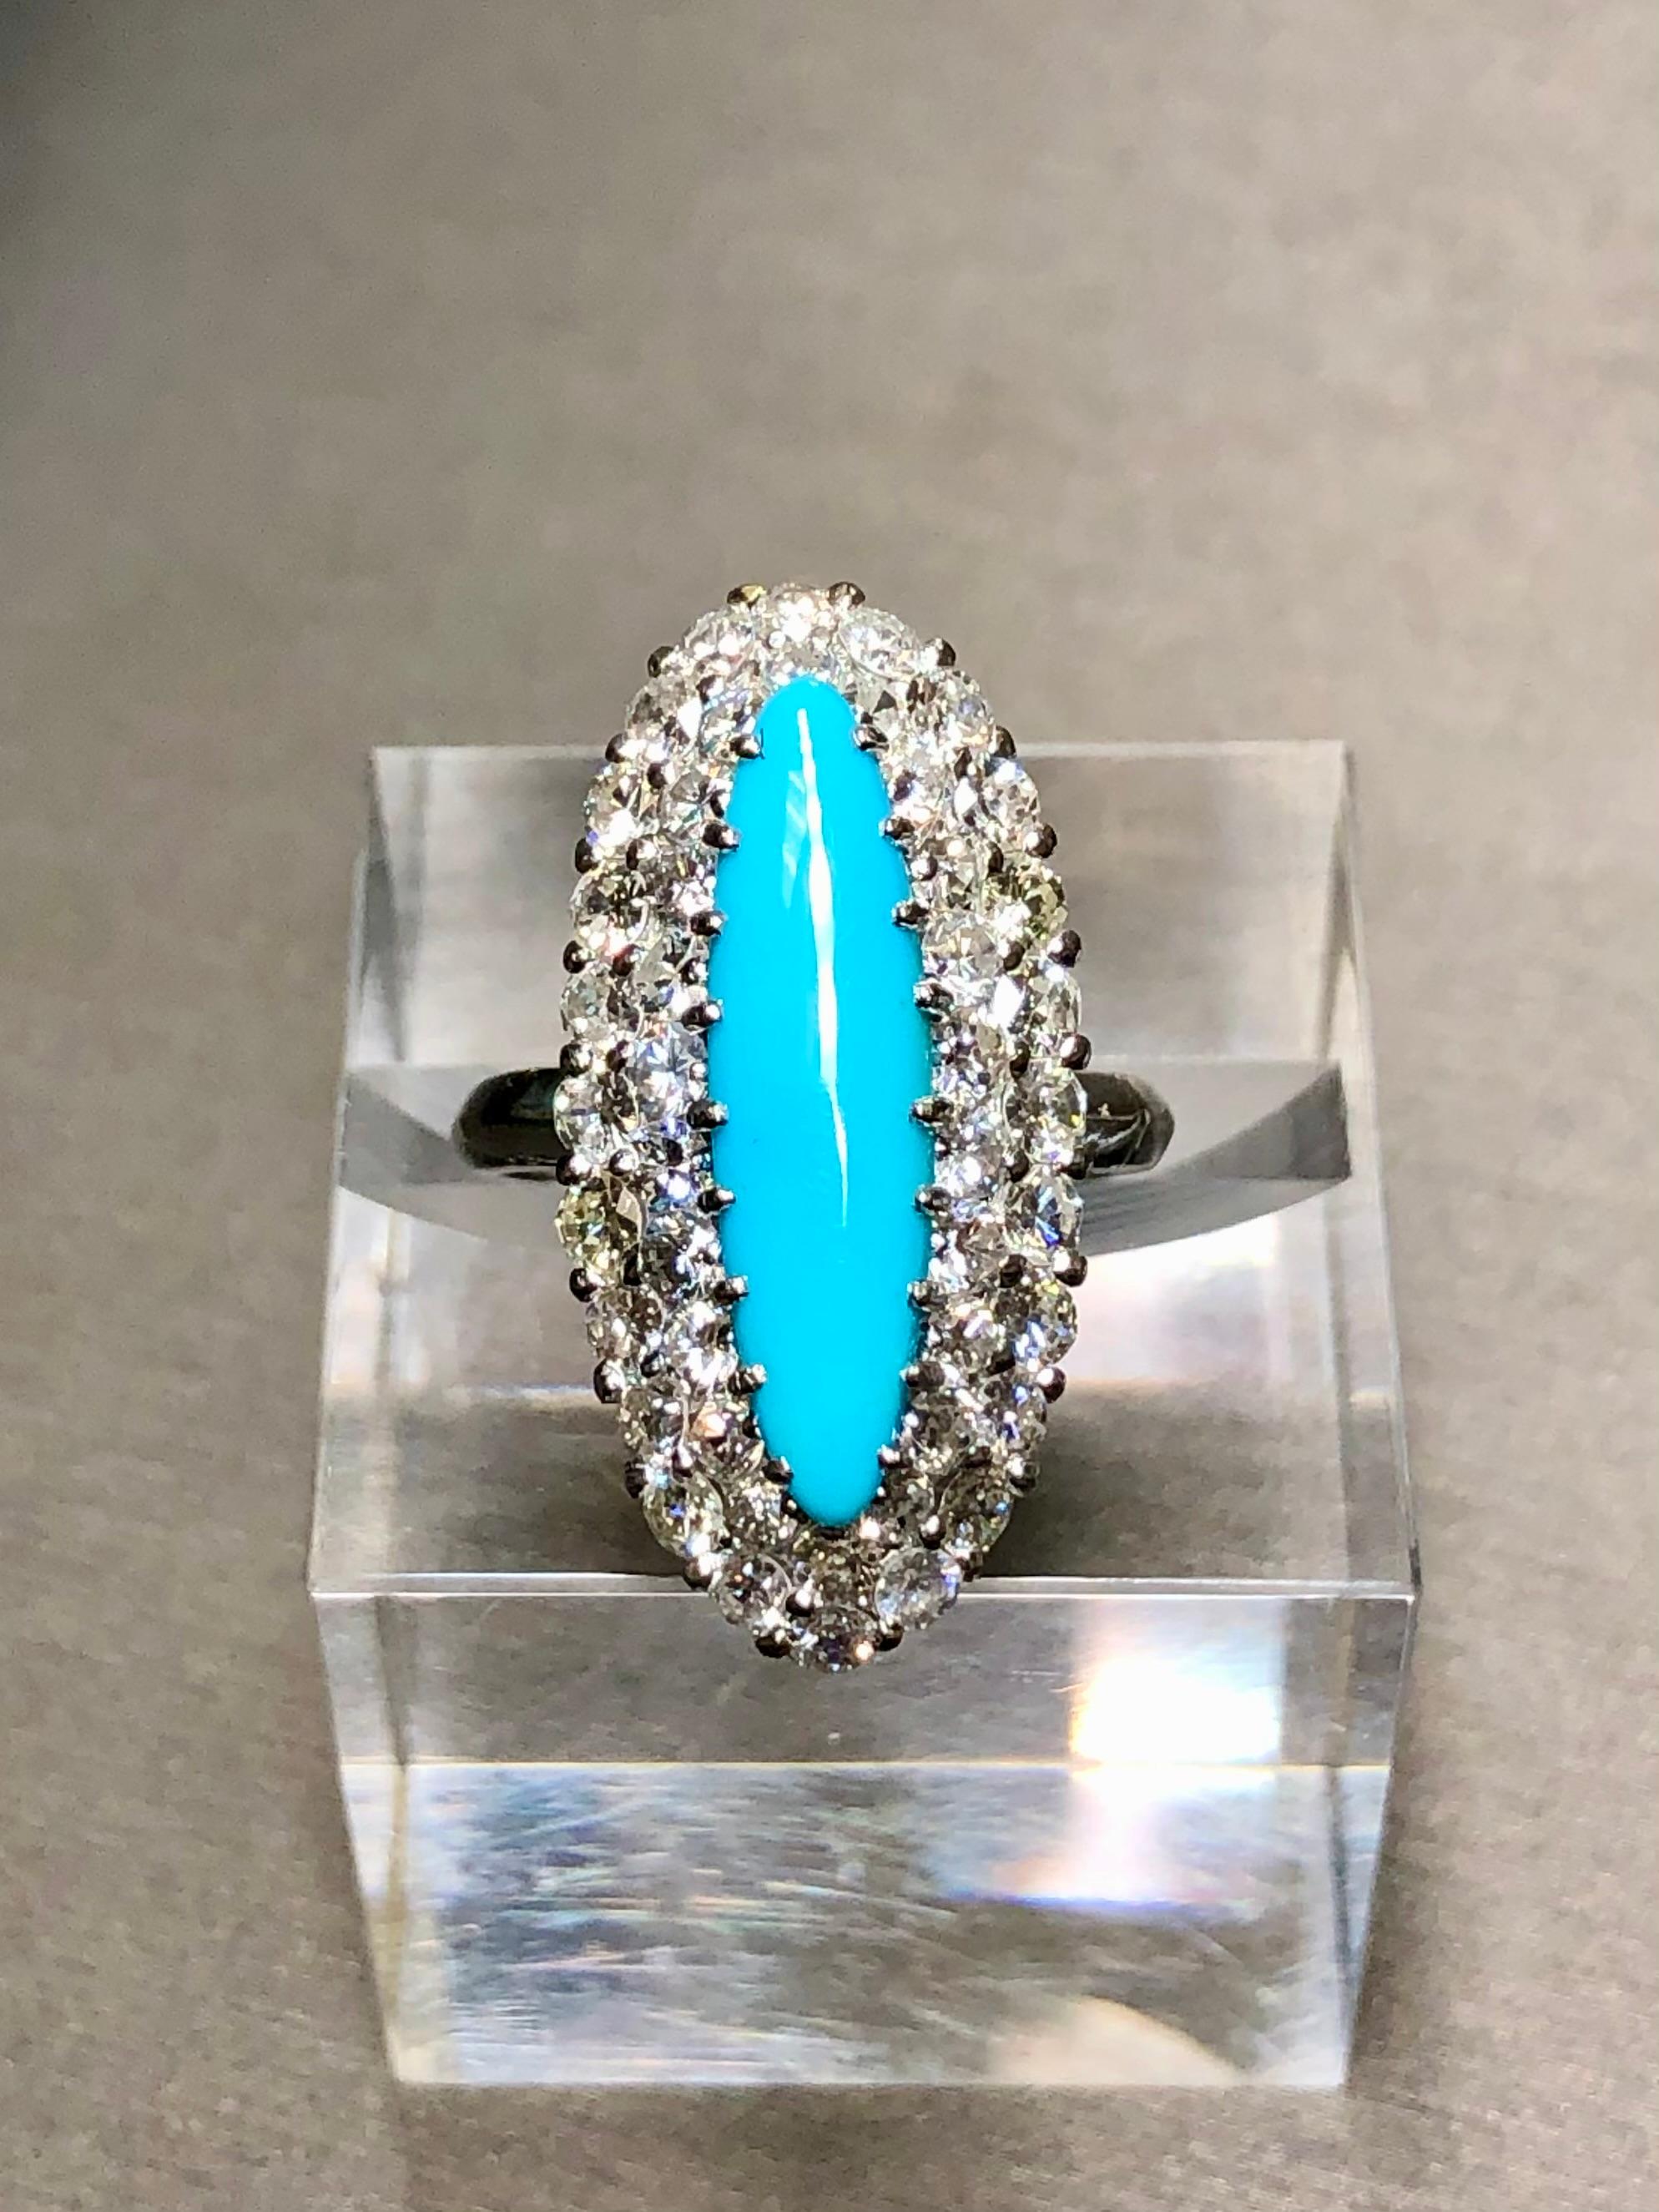 A spectacular ring c. the 1940’s crafted in 18K white gold centered by a marquise cut cabochon of Persian turquoise surrounded by approximately 2.78cttw in H-I color Vs2-Si2 clarity old European cut diamonds.


Dimensions/Weight:

Ring measures 1.1”